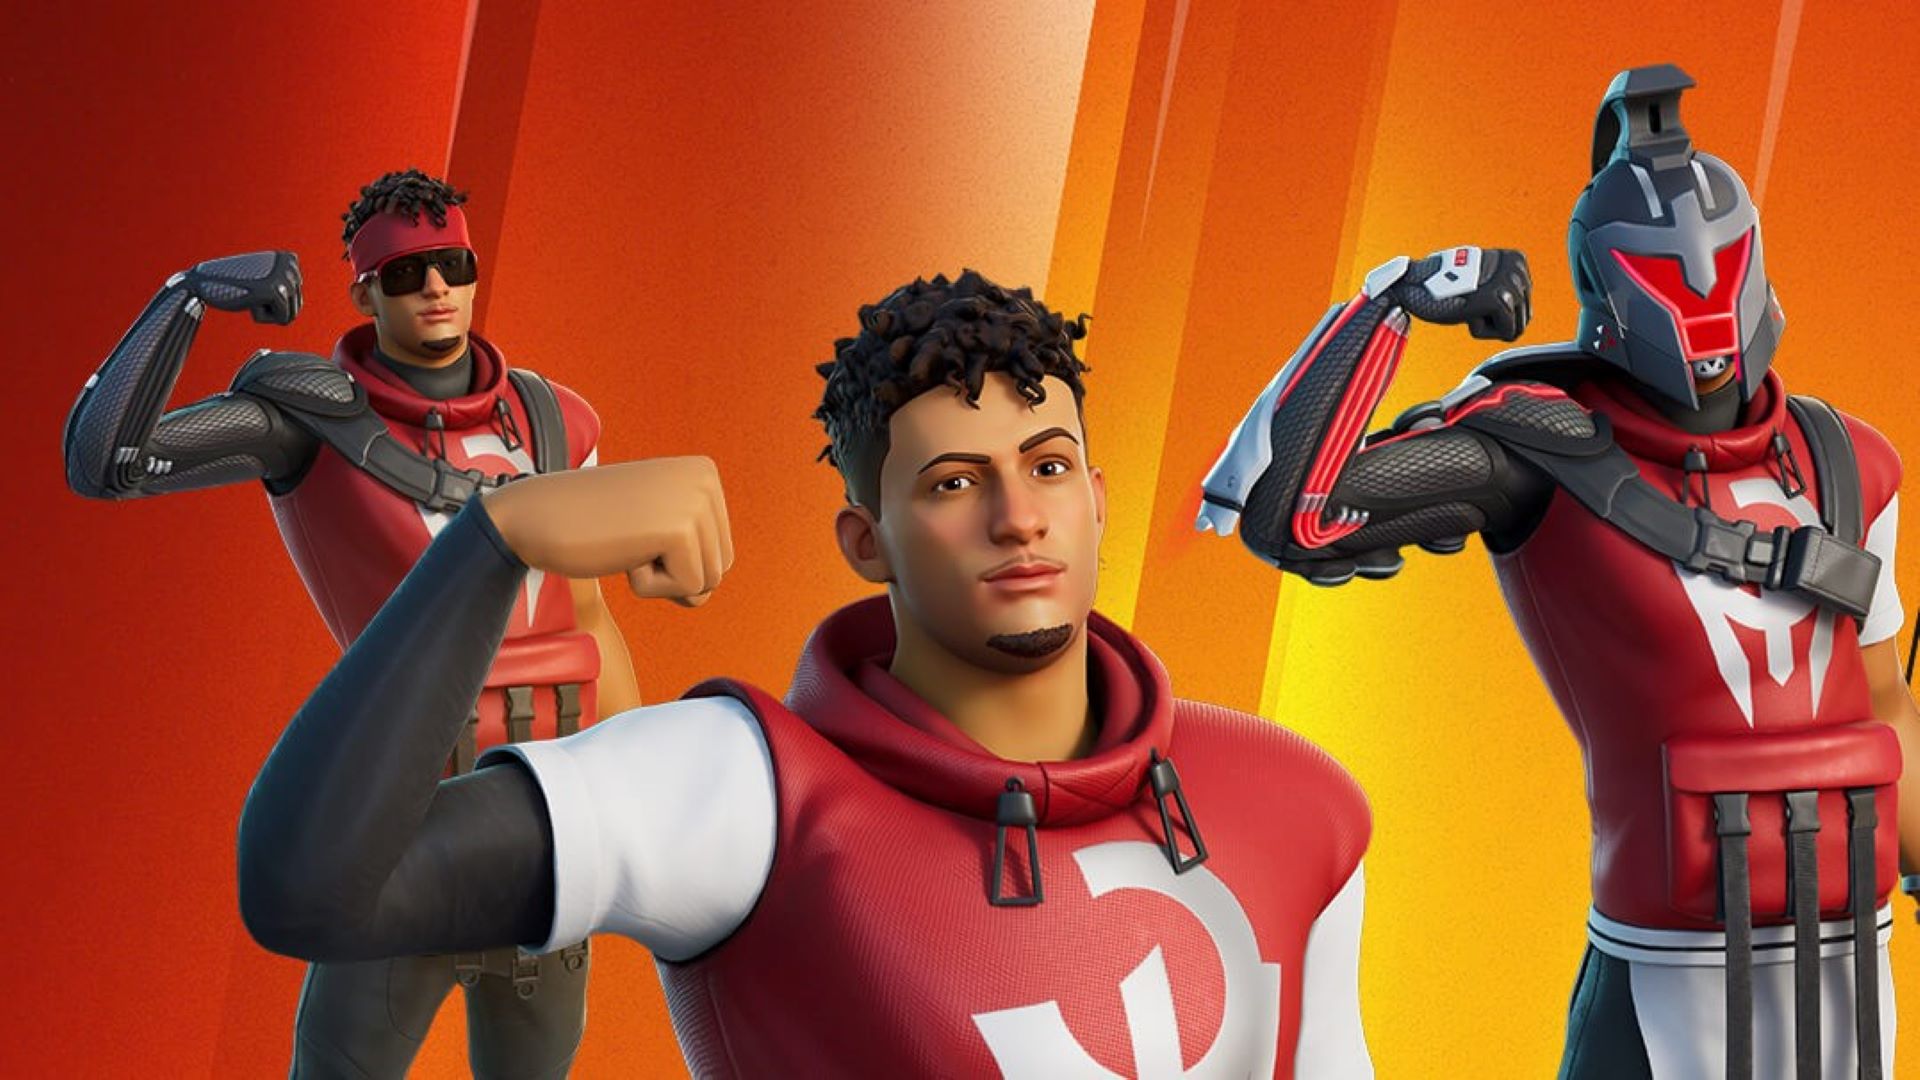 Fortnite Icon Series is getting the NFL’s Patrick Mahomes